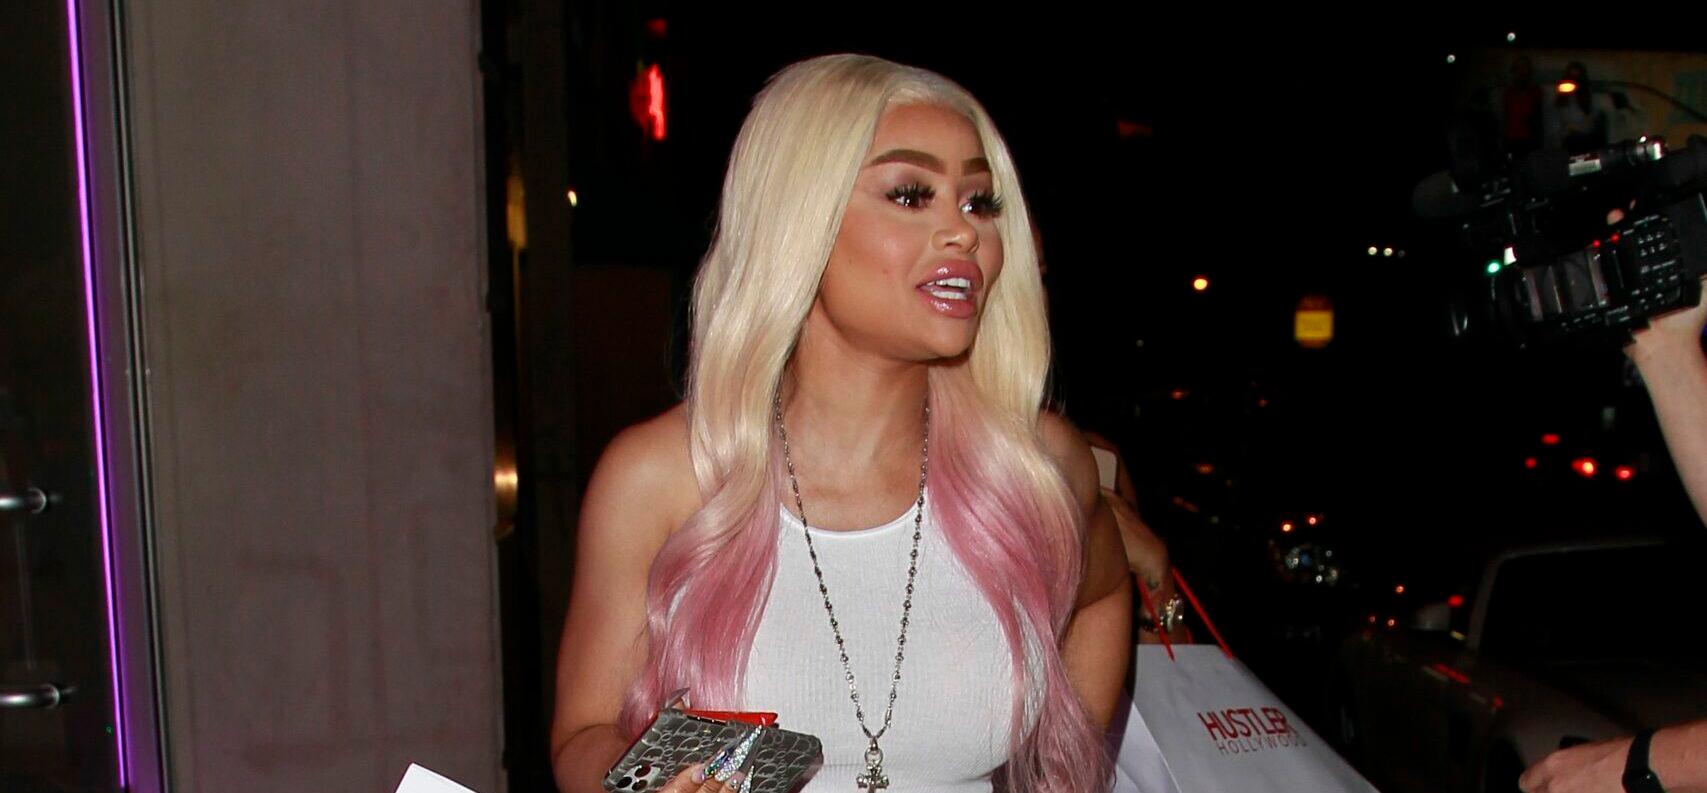 Blac Chyna and Toochi Kash make a late night shopping trip to world famous Sex Toy Store Hustler